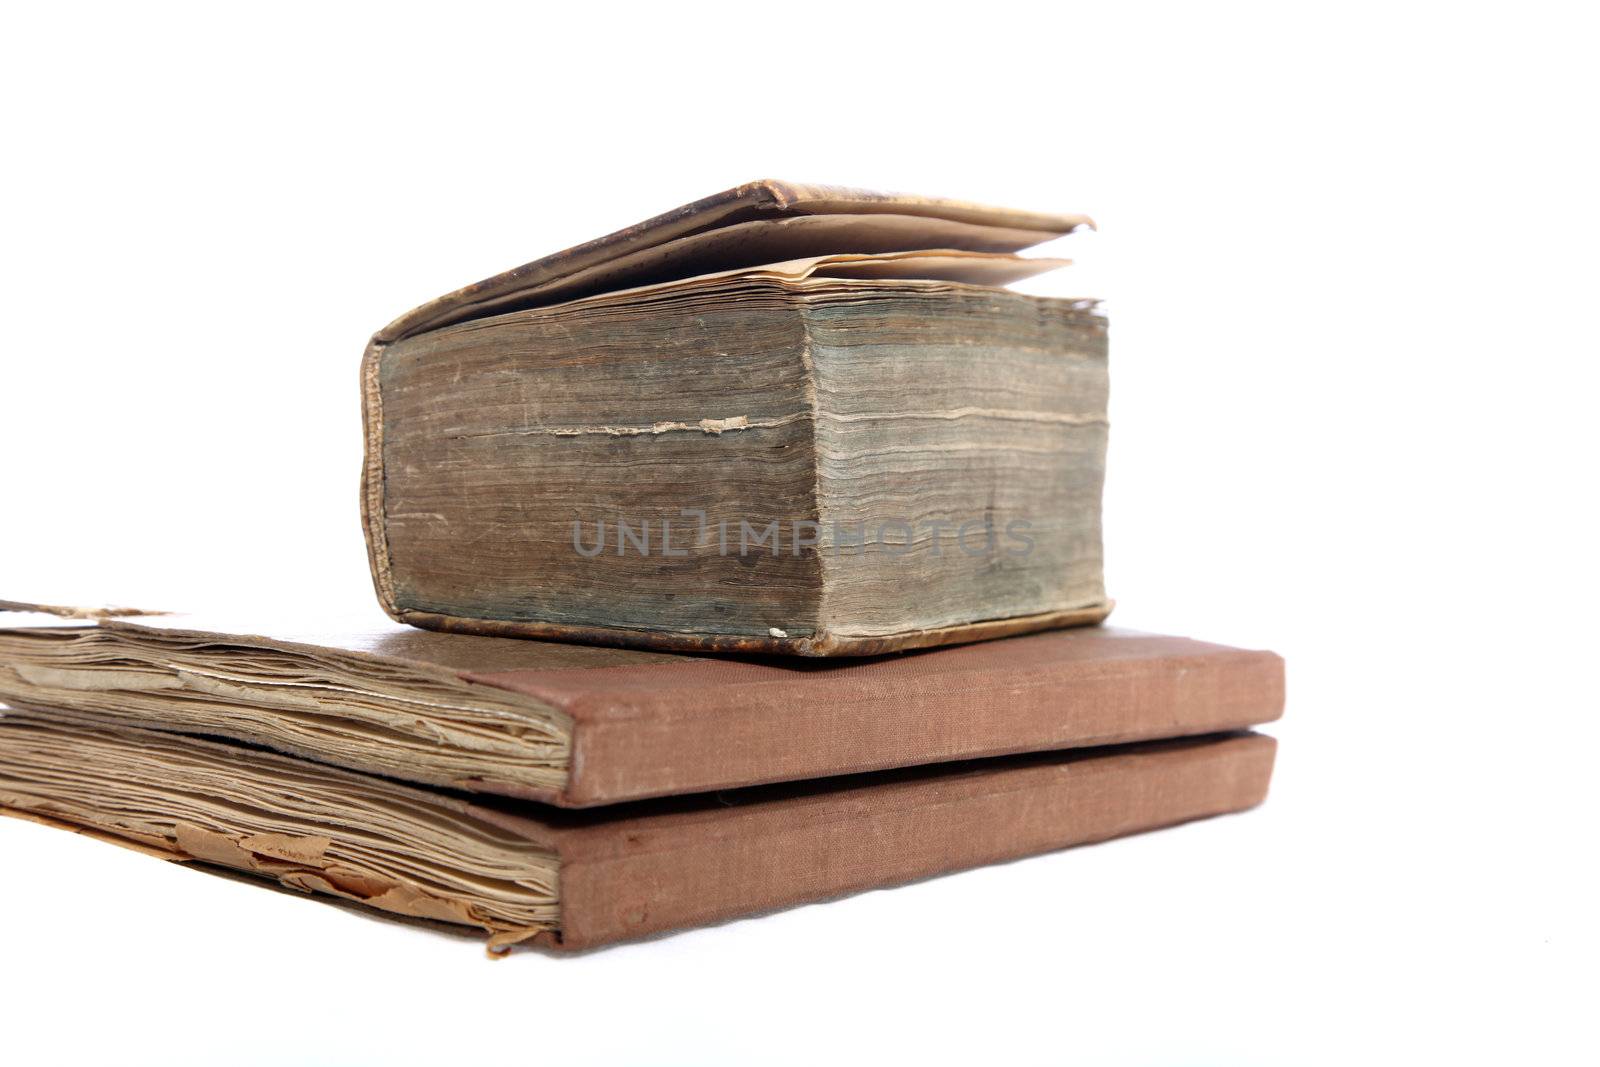 Three old vintage books with worn aged pages stacked on top of each other isolated on white